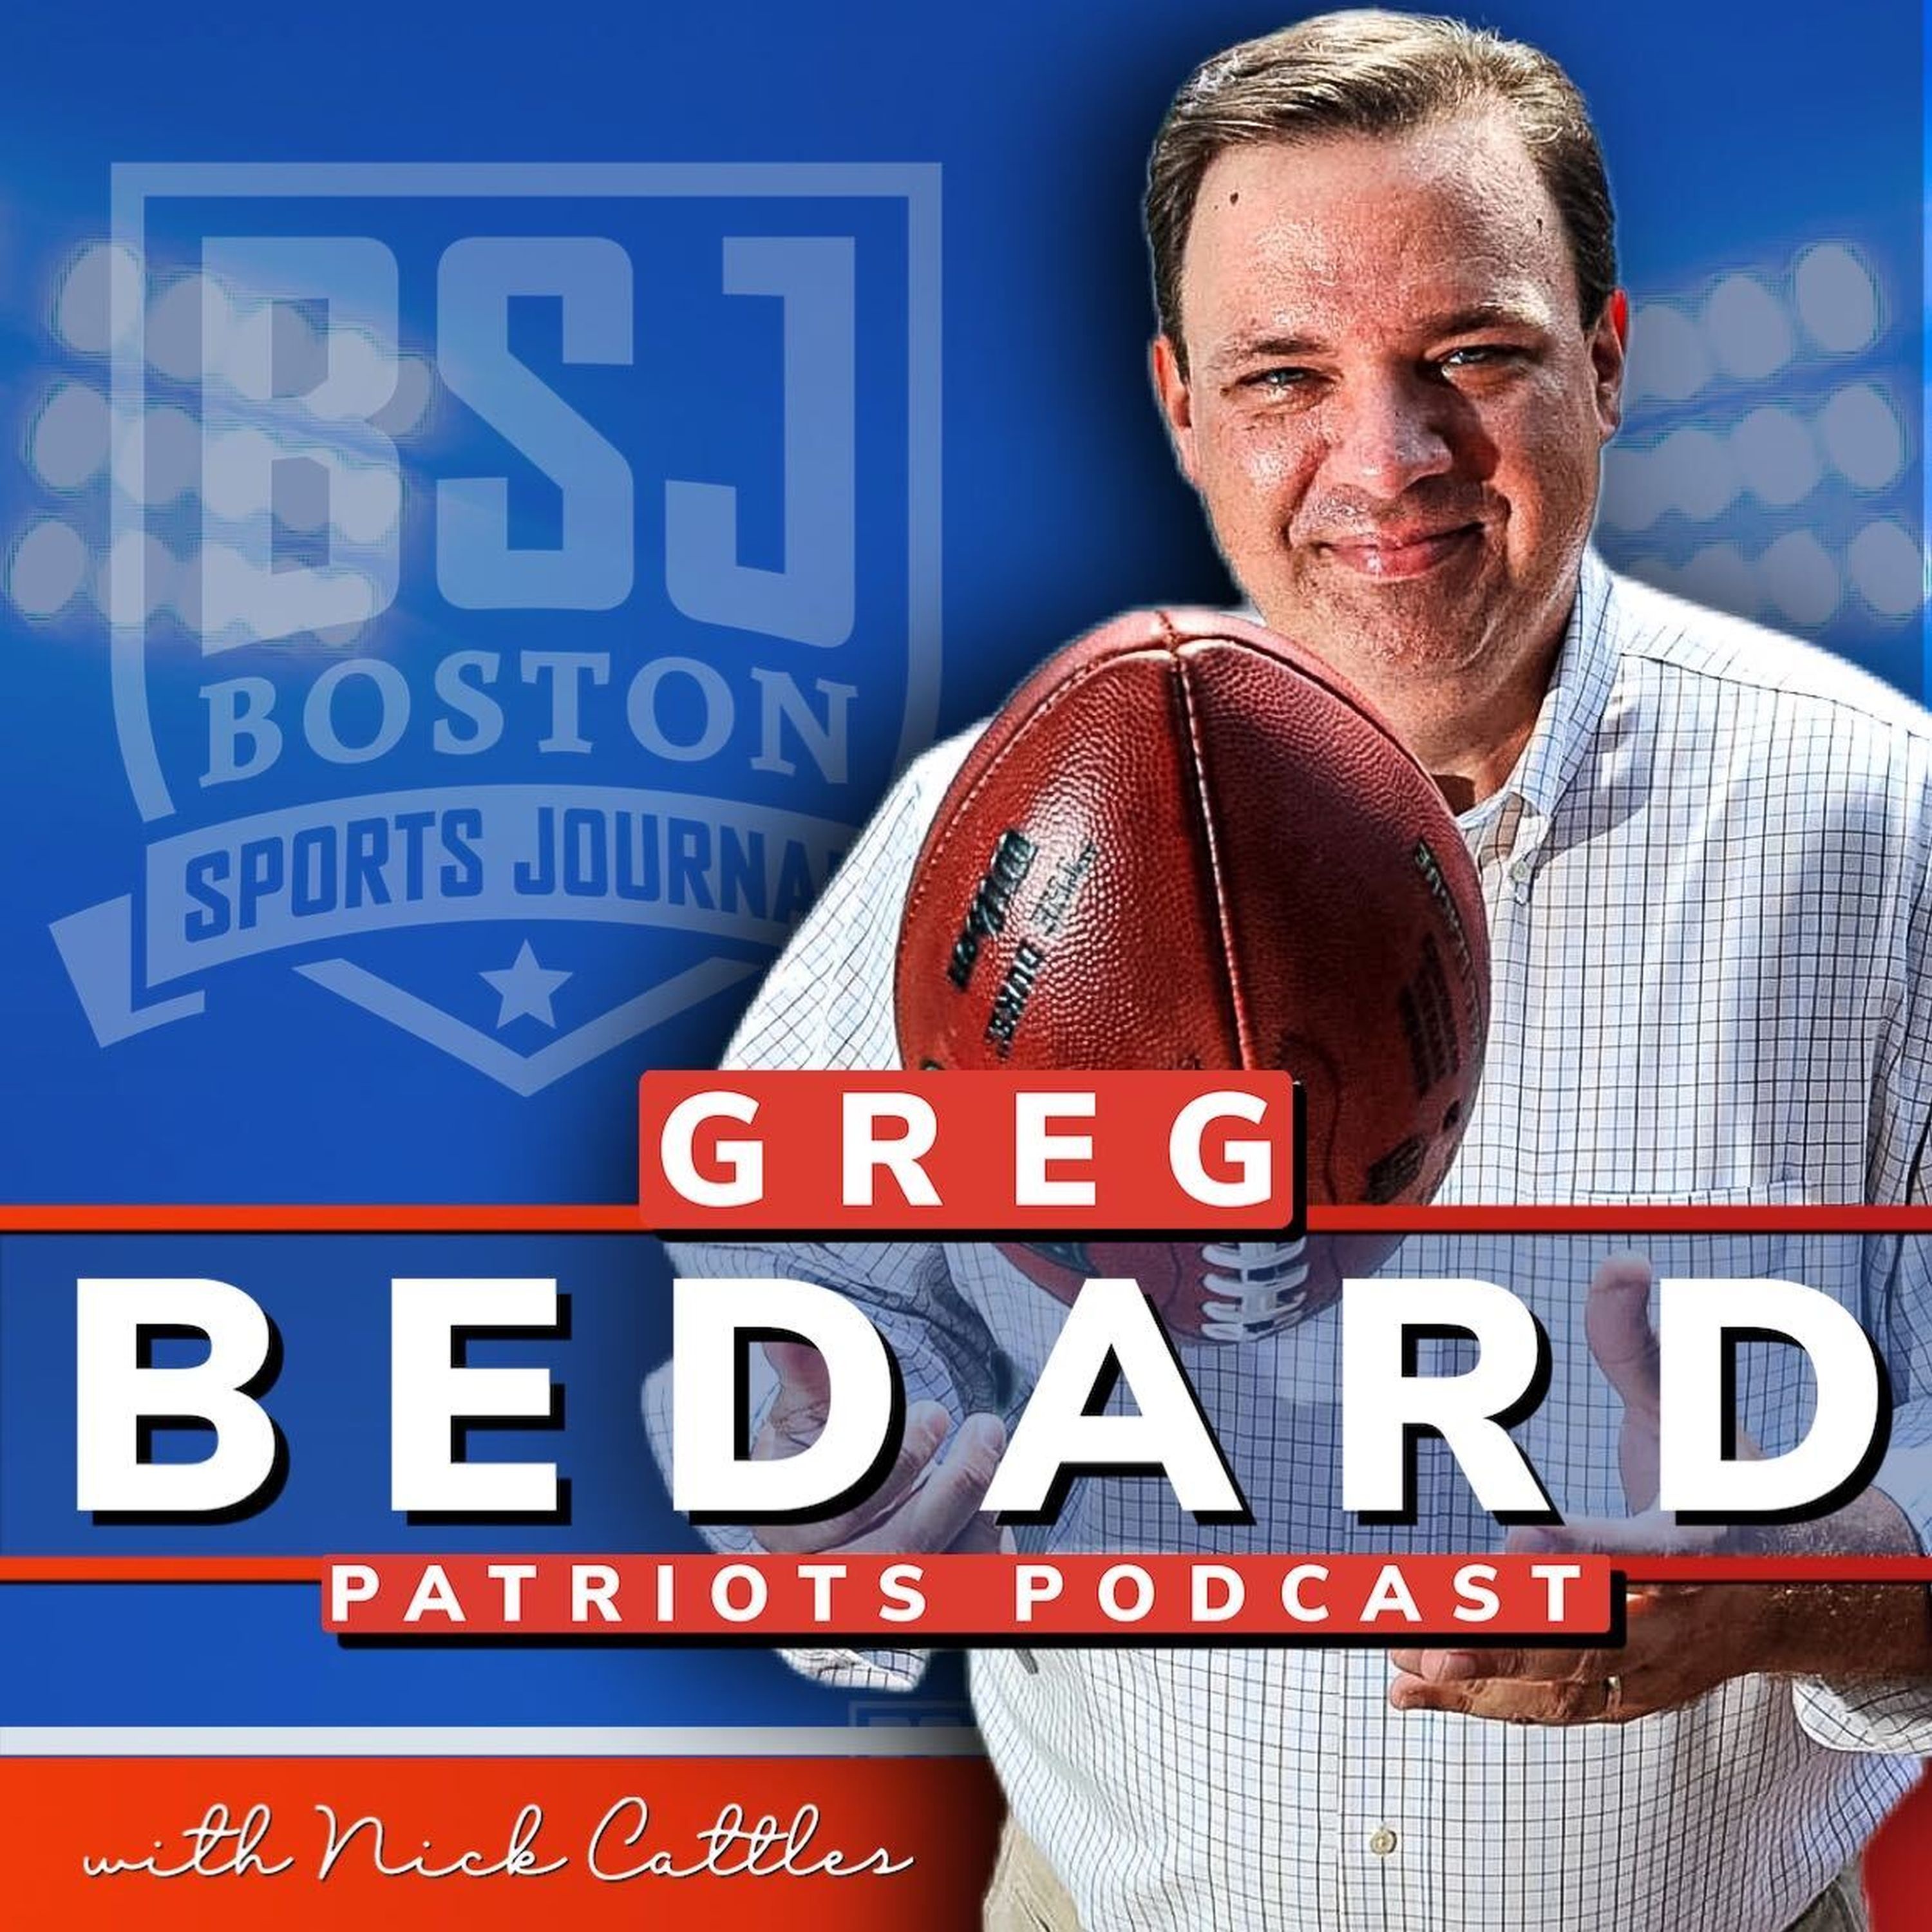 Fresh update on "fourth quarter" discussed on Greg Bedard Patriots Podcast with Nick Cattles